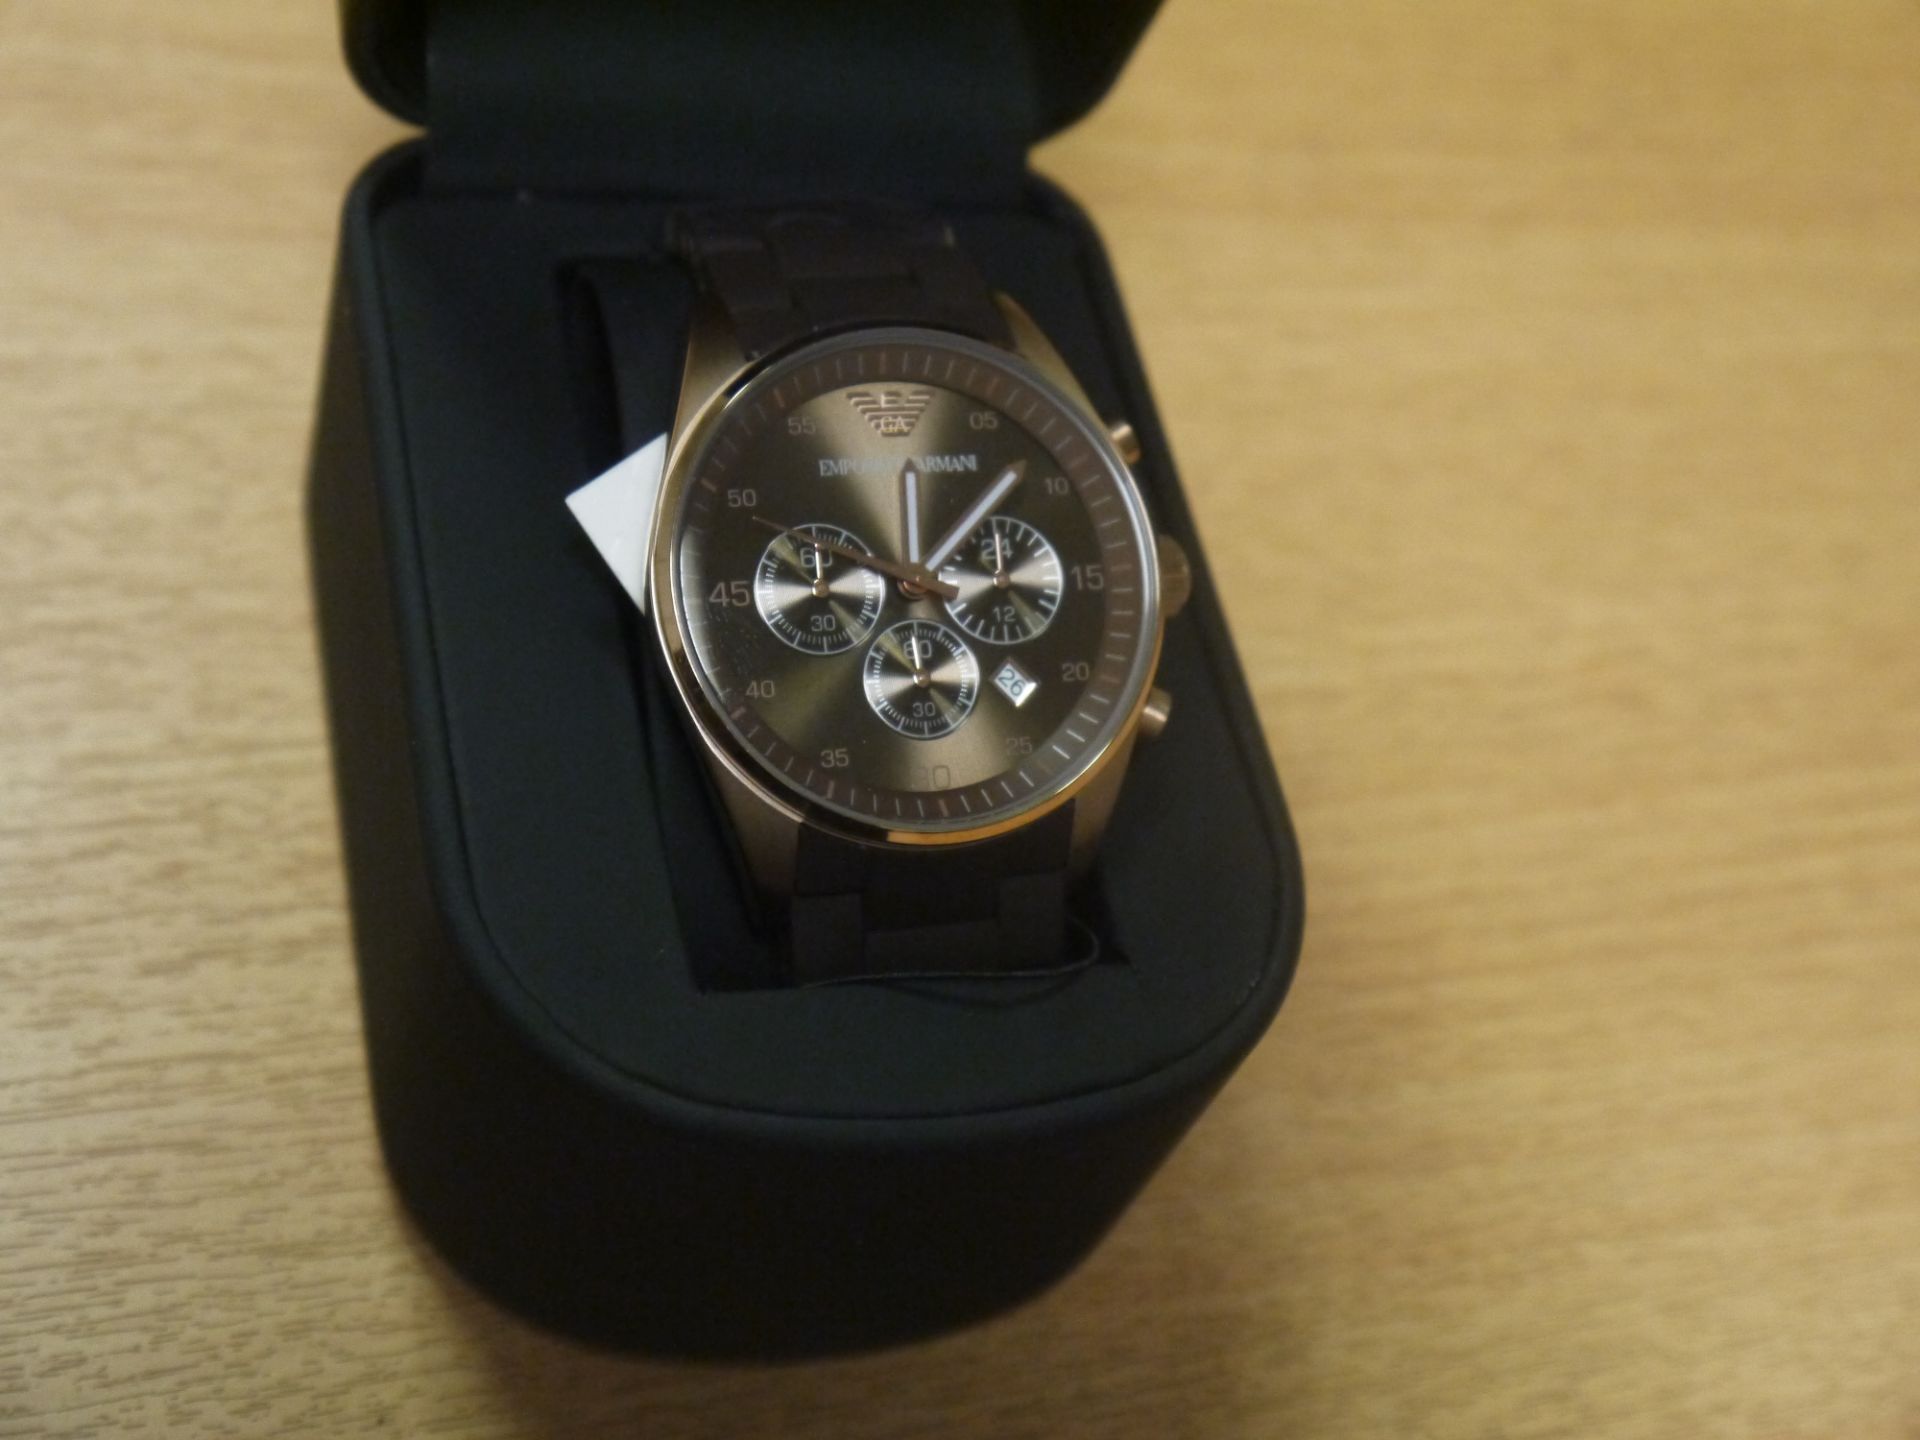 NO VAT!! Emporio Armani Chronograph Gents Watch (AR5890) New, boxed and ticking. RRP £341. See link.